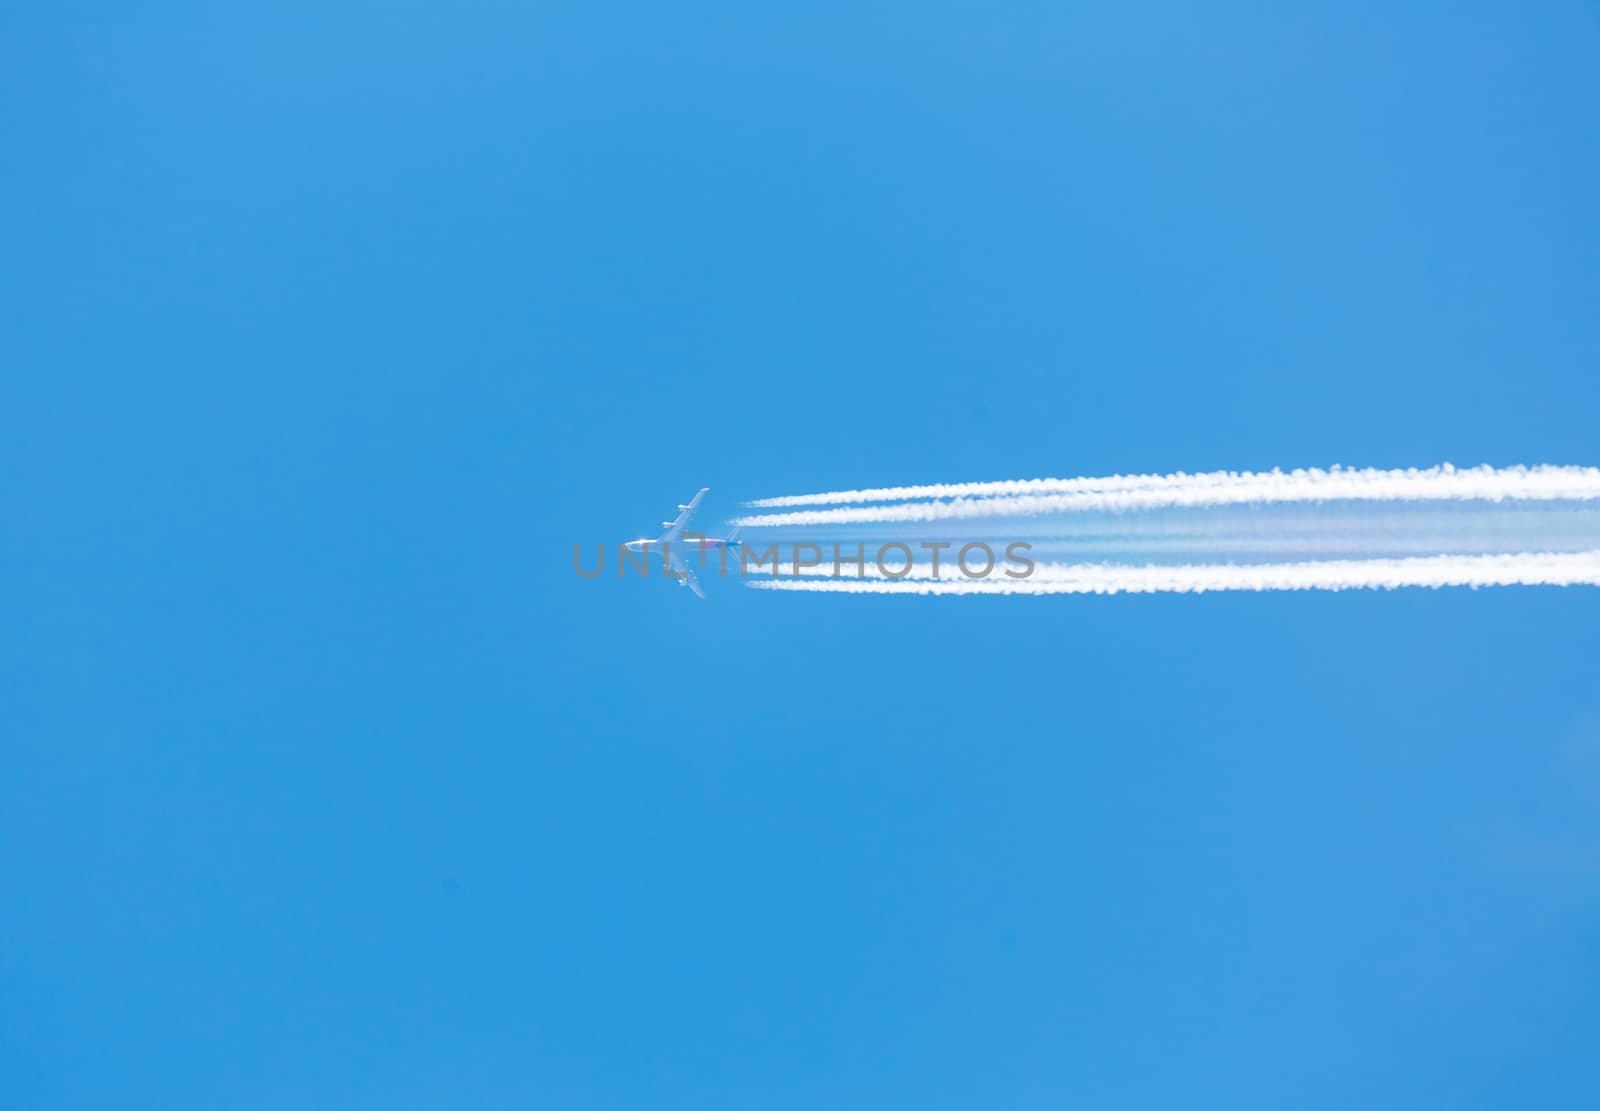 A plane flying on a clear blue sky with vapor trail